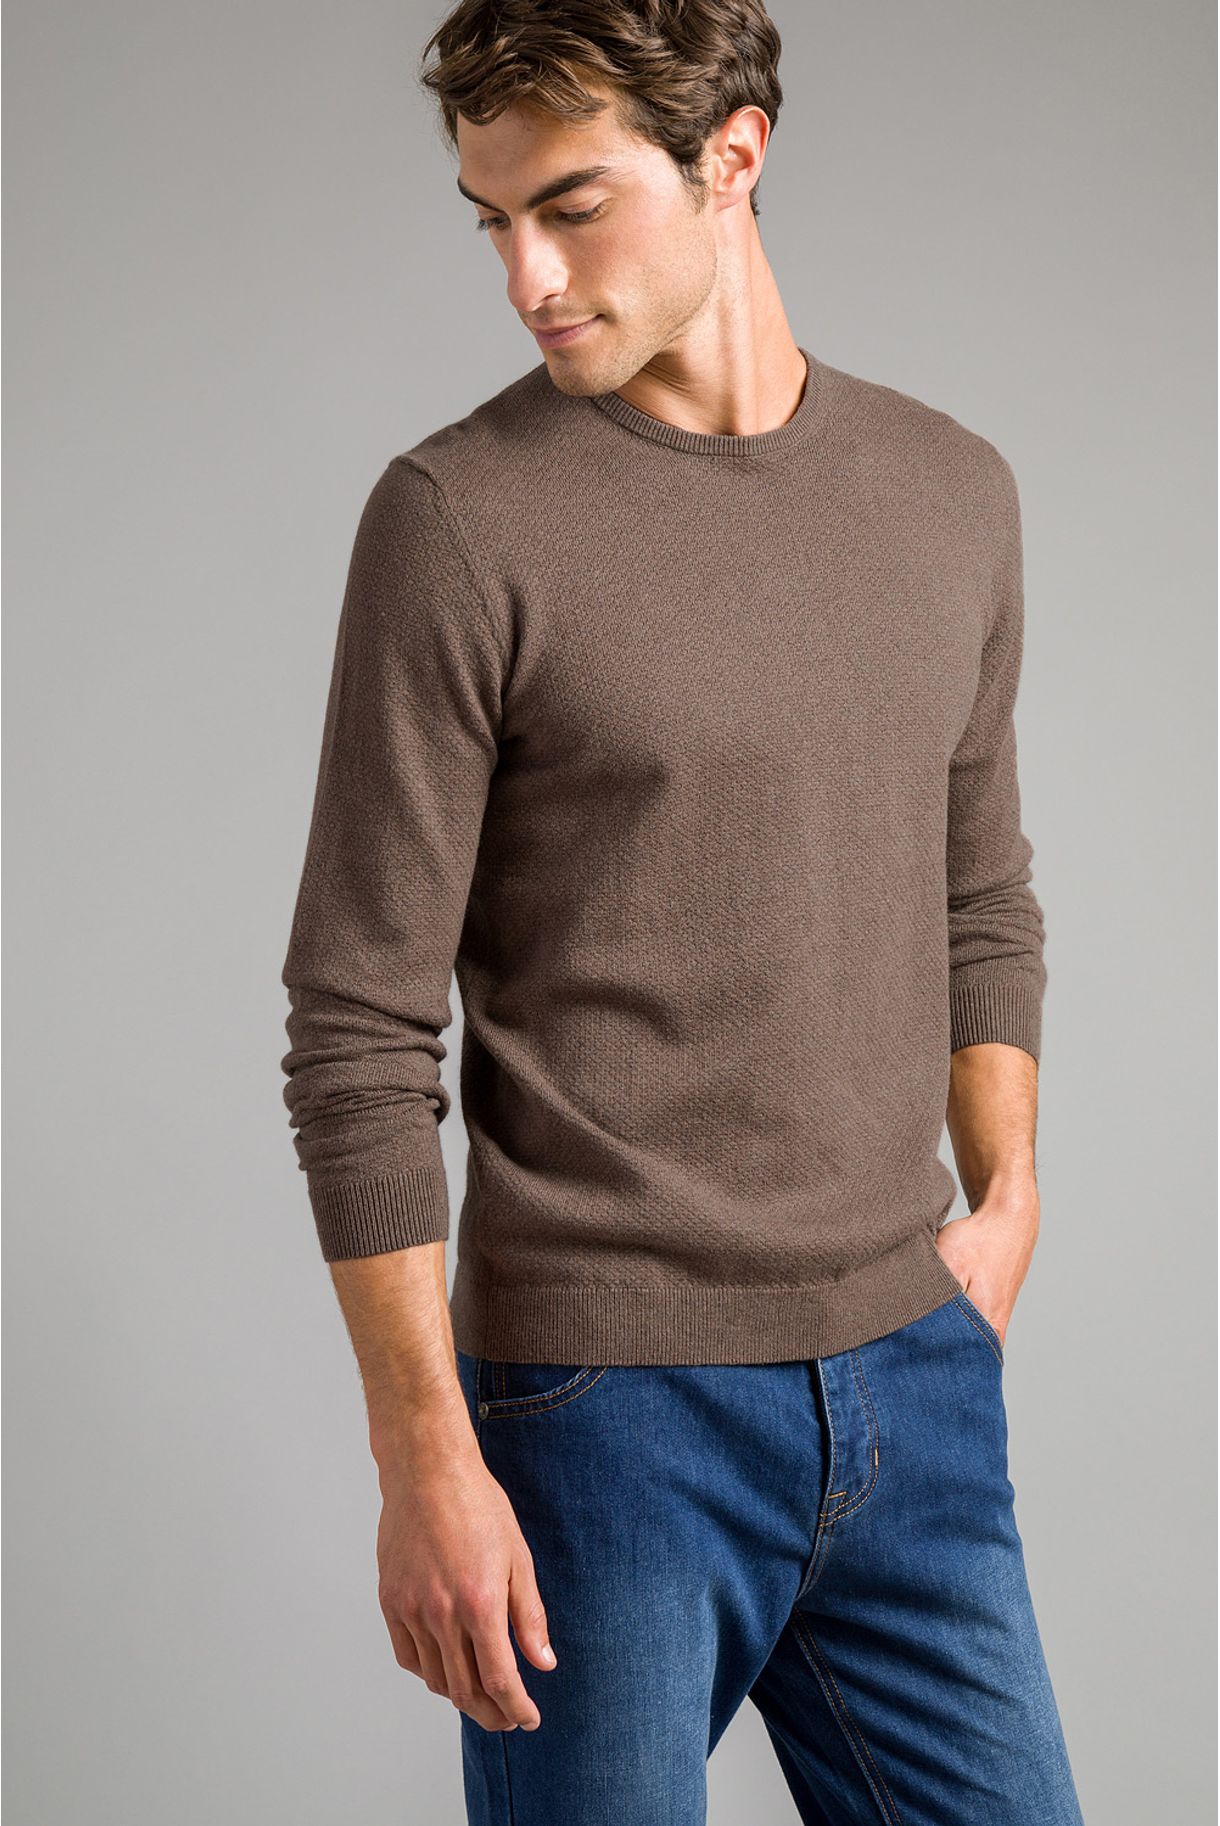 MEN'S SWEATER WITH STRUCTURE 95/5